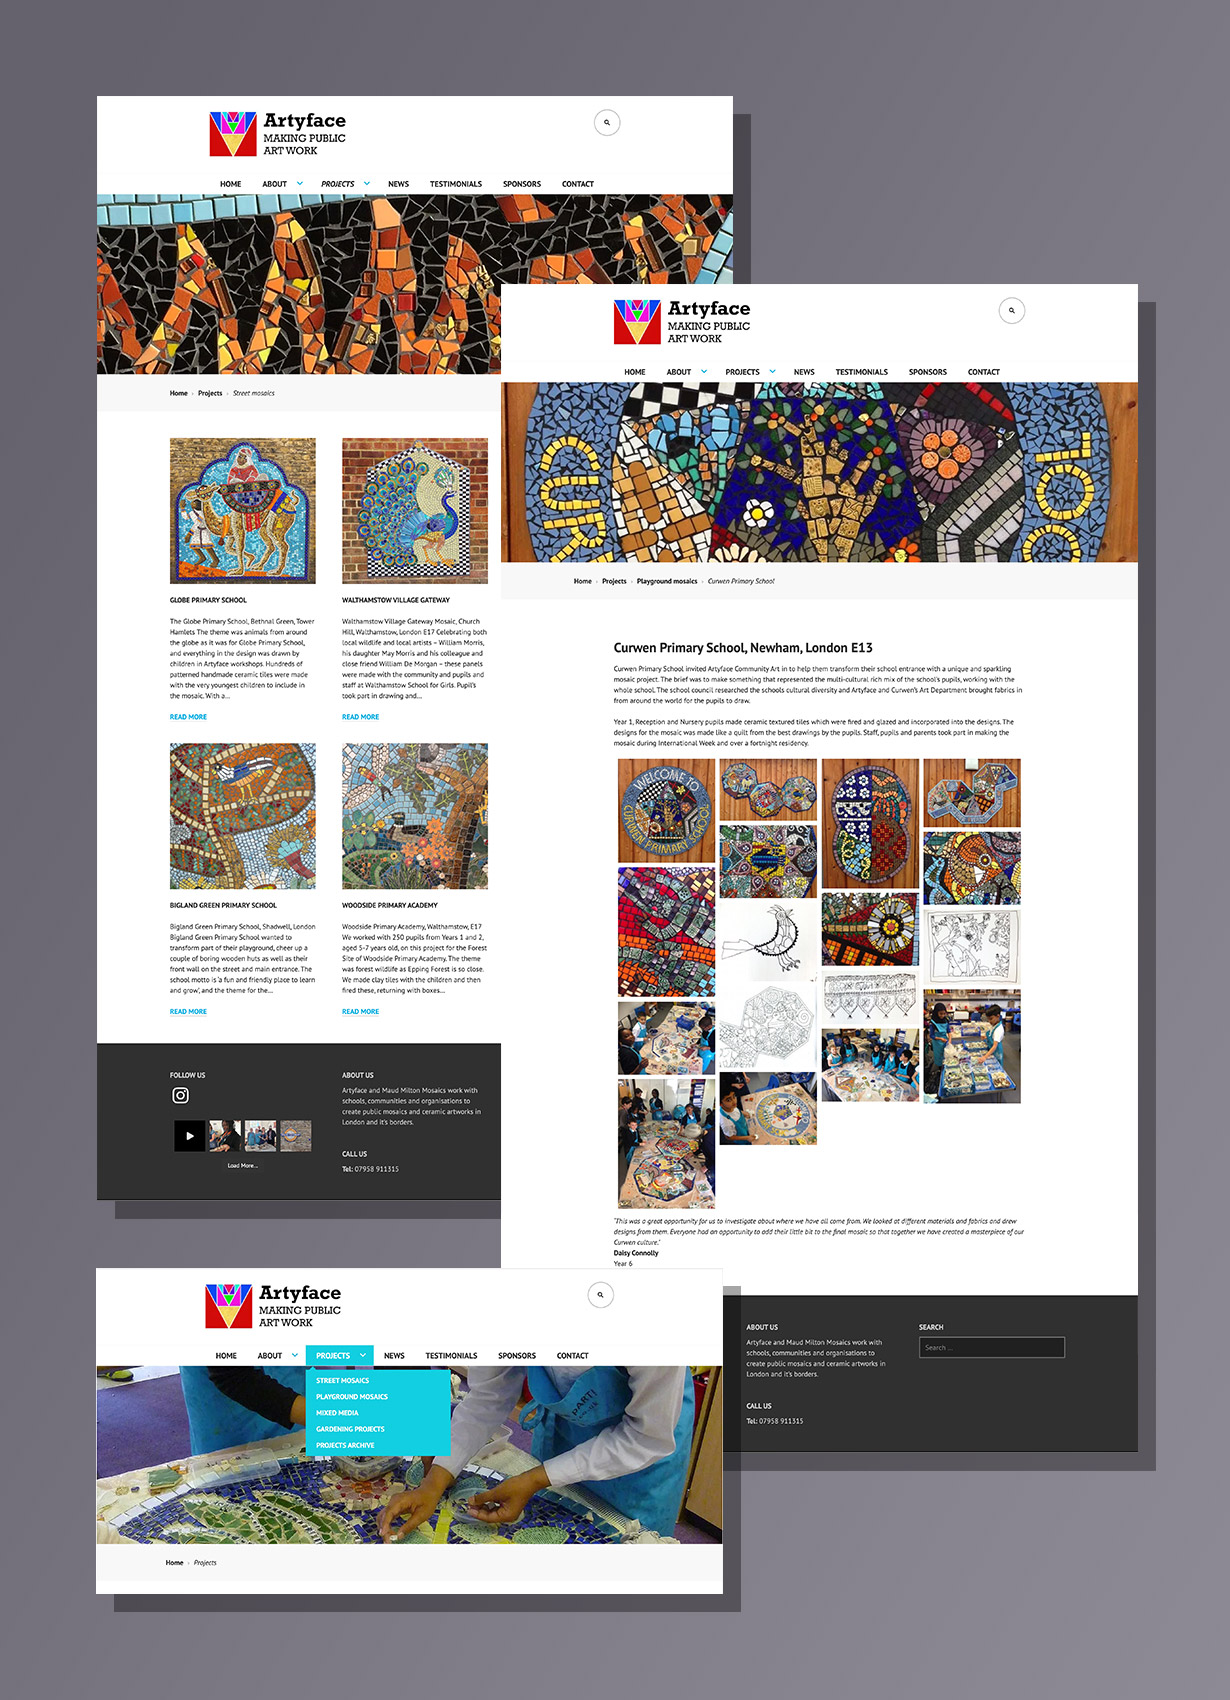 Artyface street mosaic projects page, individual project page and navigation detail